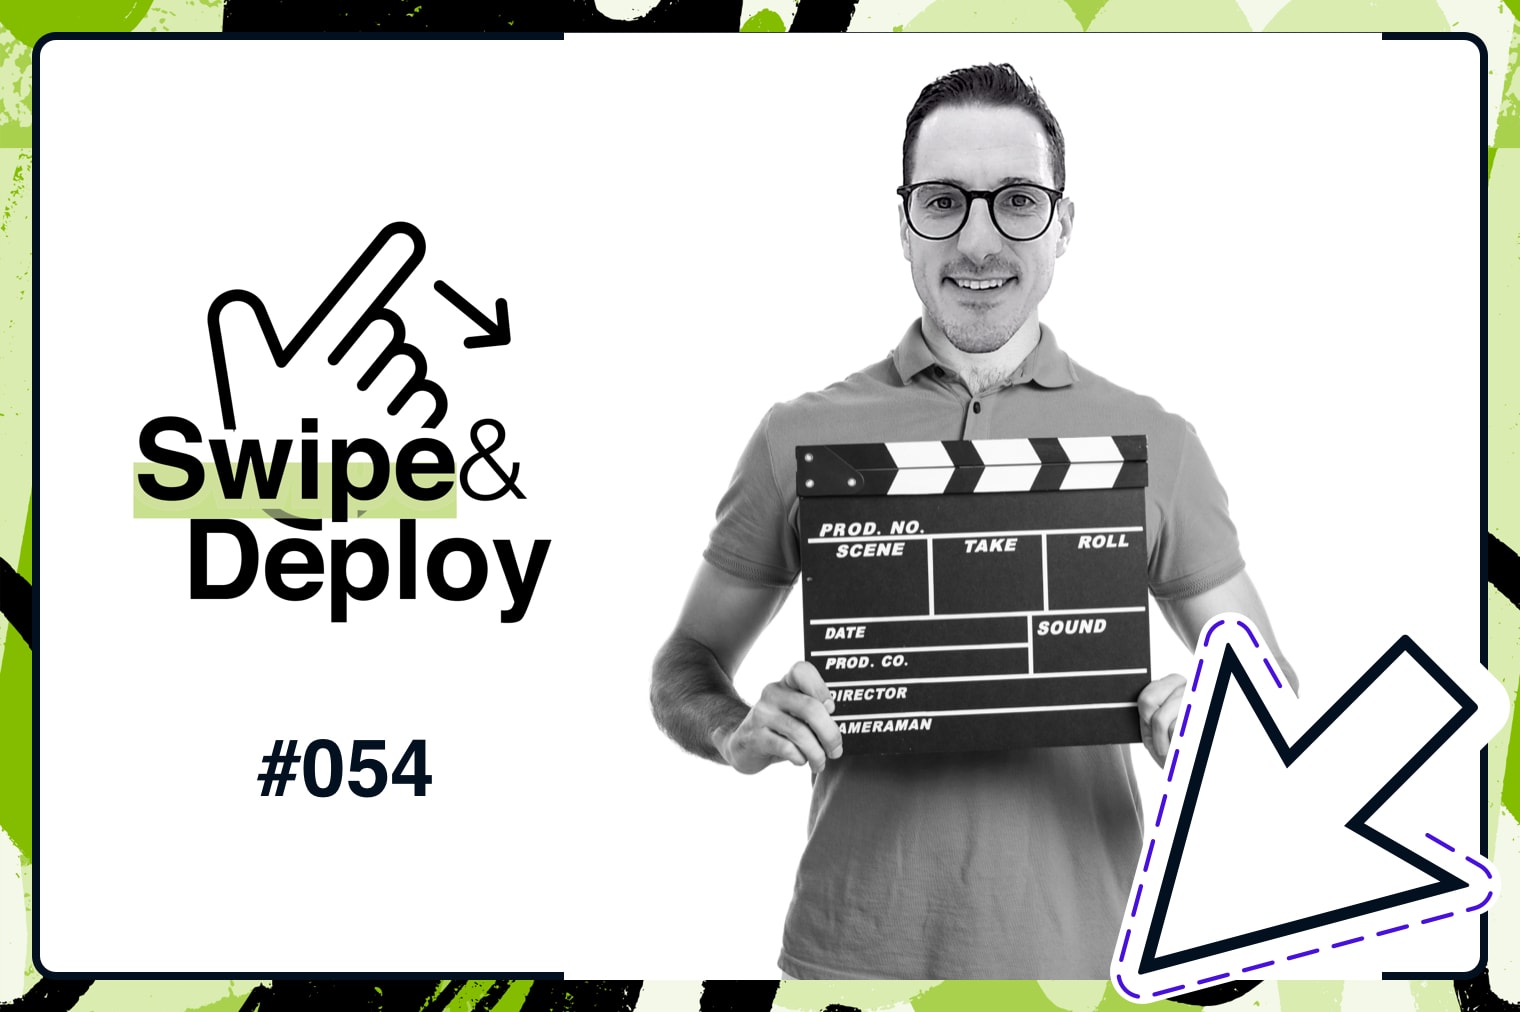 Swipe & Deploy 54 blog hero image of a man holding a clapperboard.